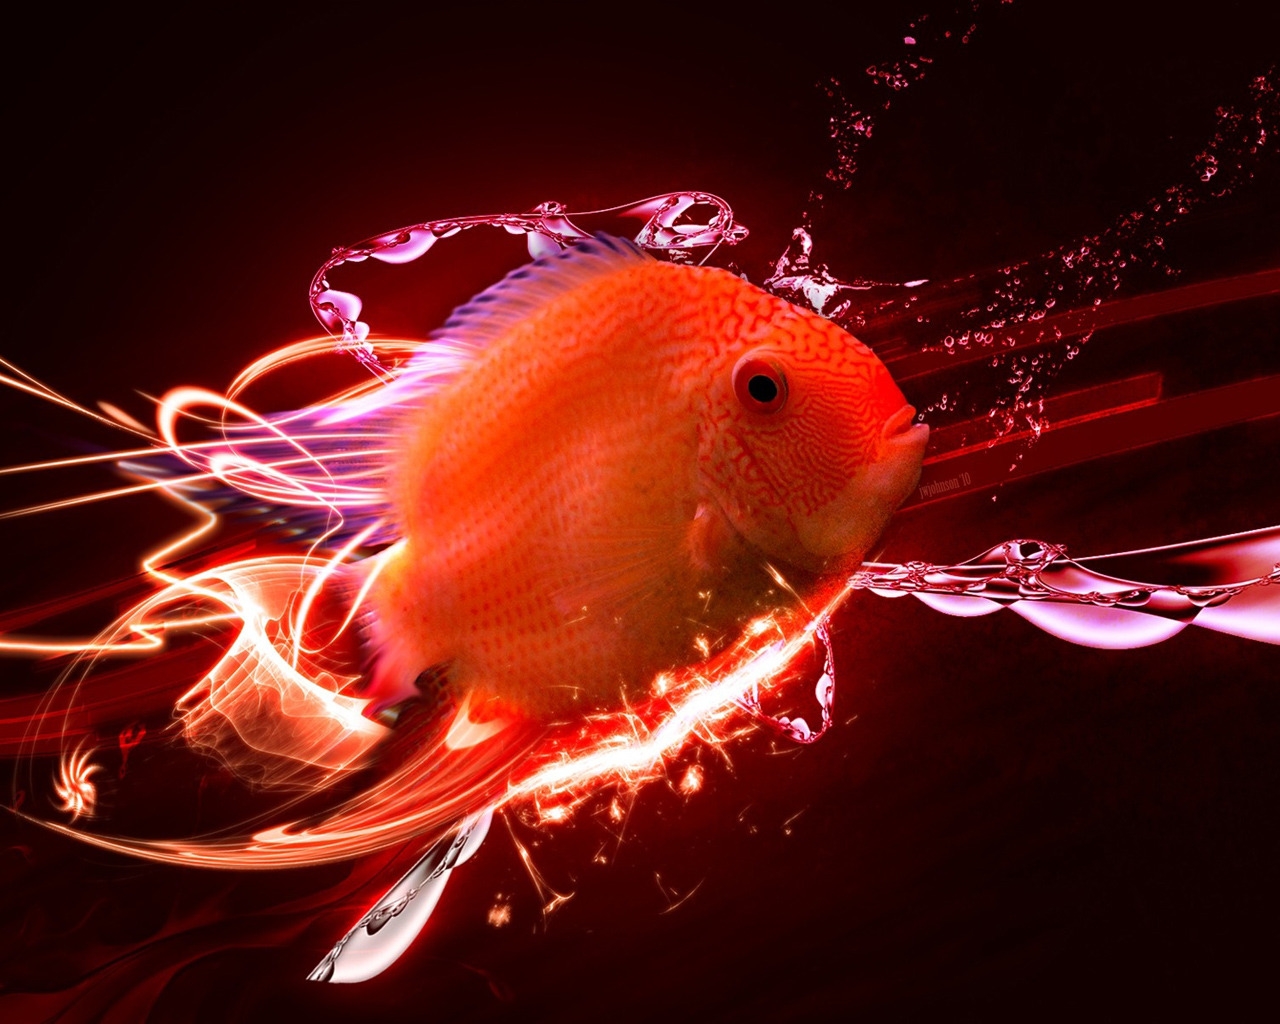 Red fish for 1280 x 1024 resolution